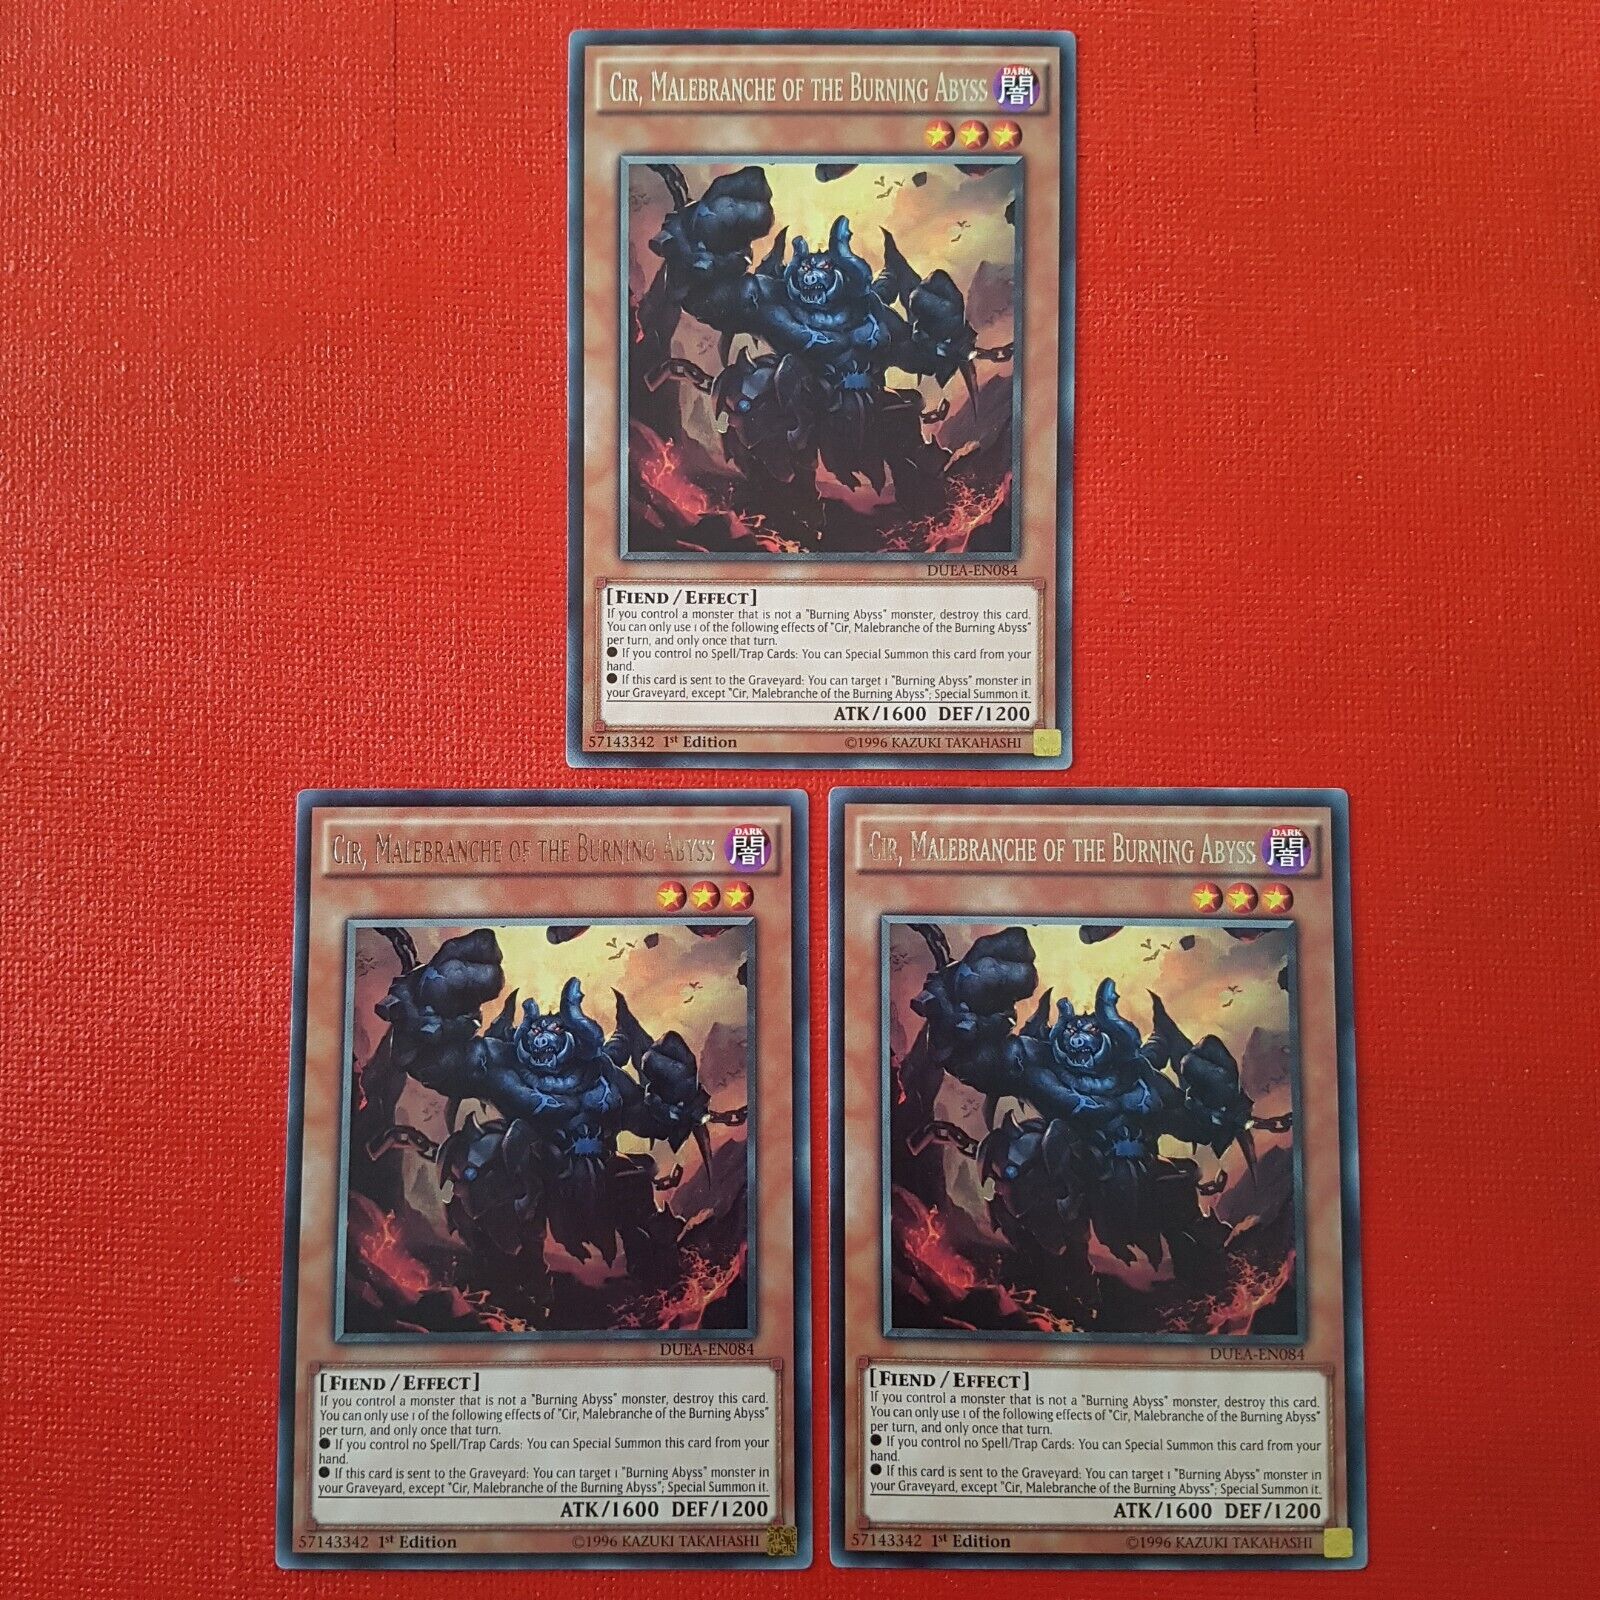 Yugioh Cir, Malebranche Of The Burning Abyss DUEA-EN084 1st Edition Playset